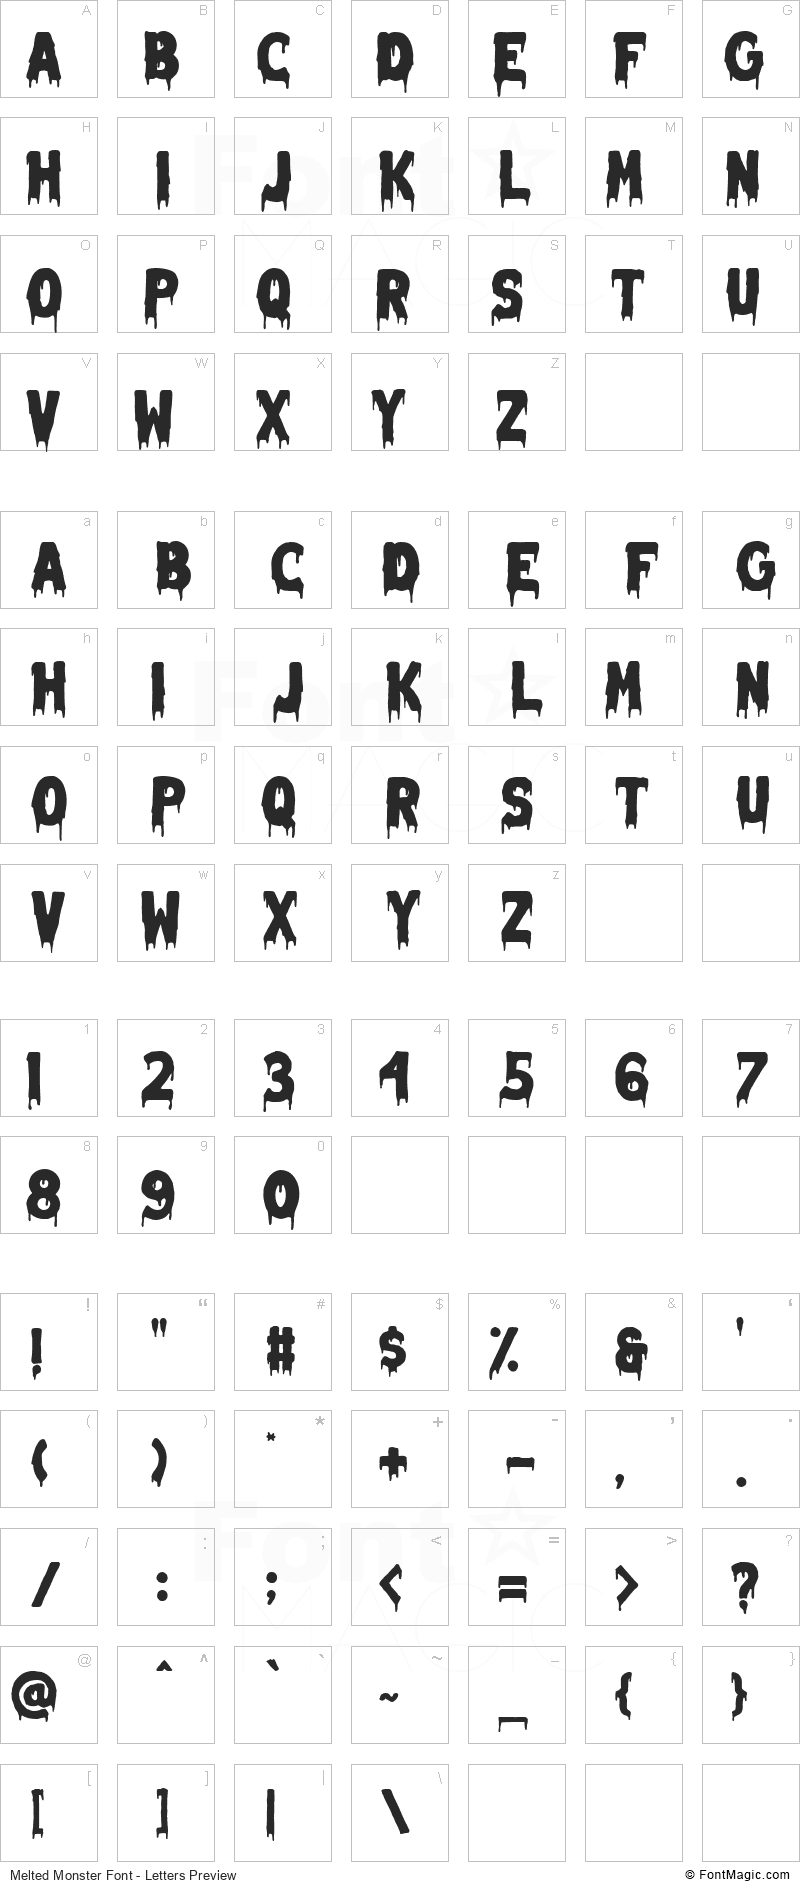 Melted Monster Font - All Latters Preview Chart